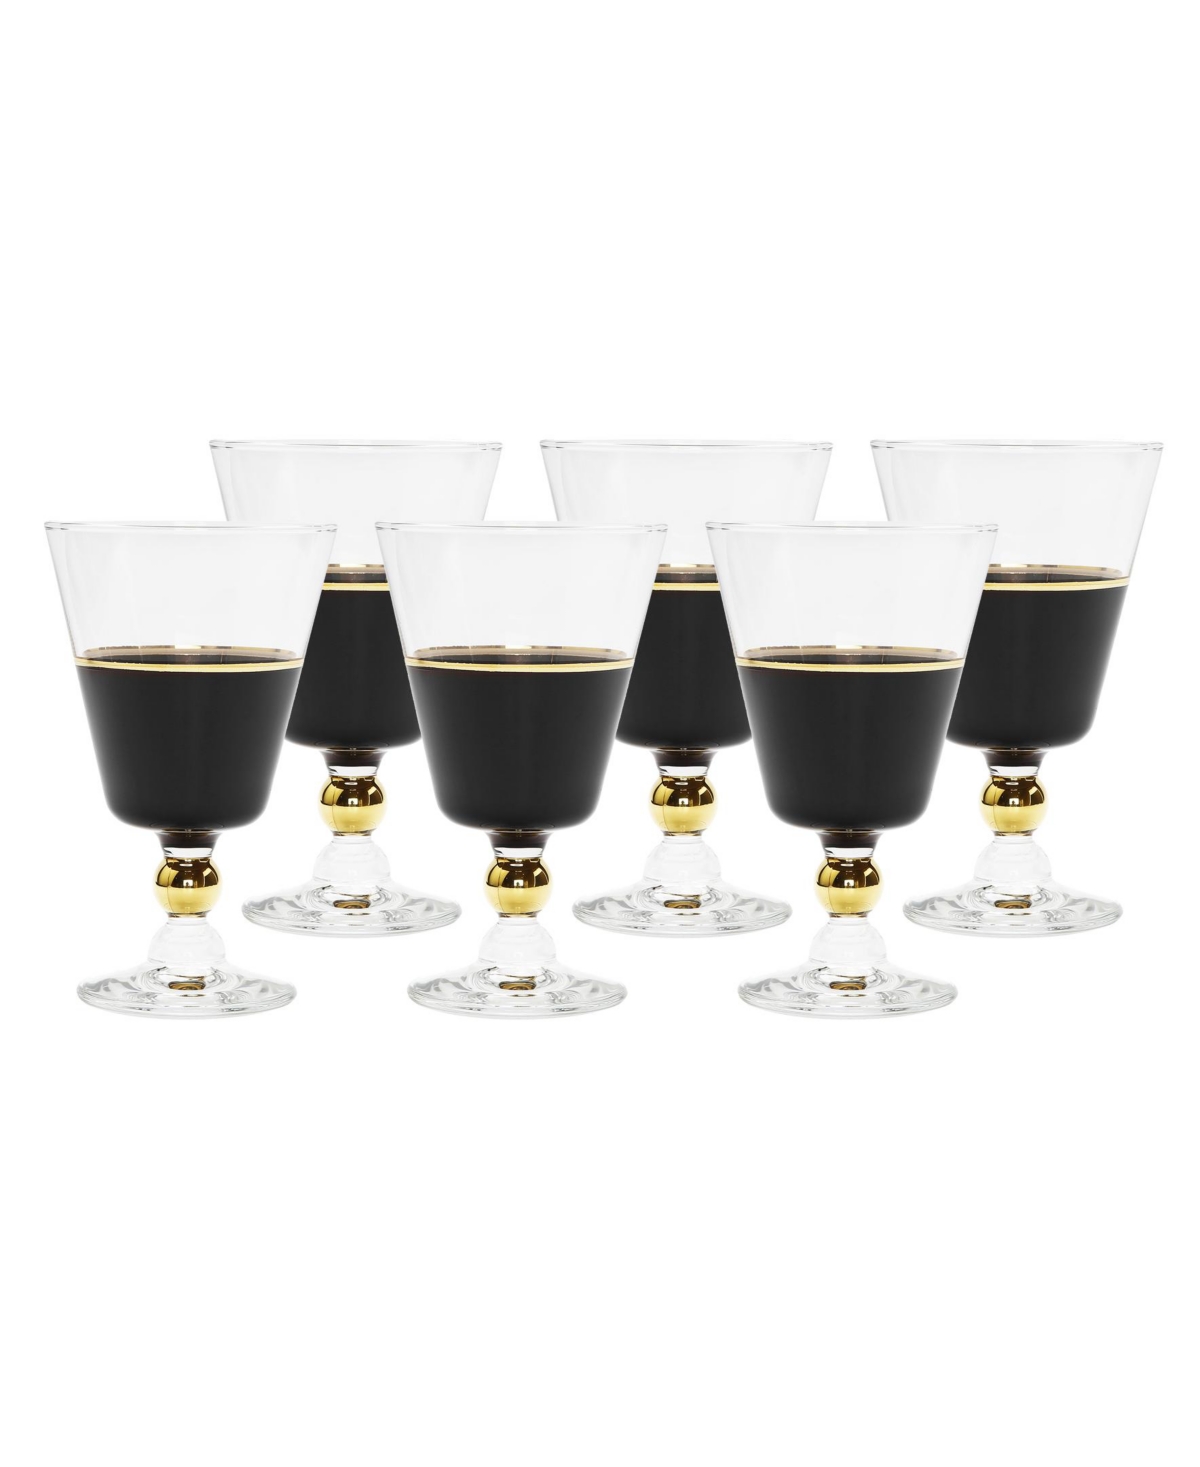 Classic Touch Black Water Glasses With Trim And Stem, Set Of 6